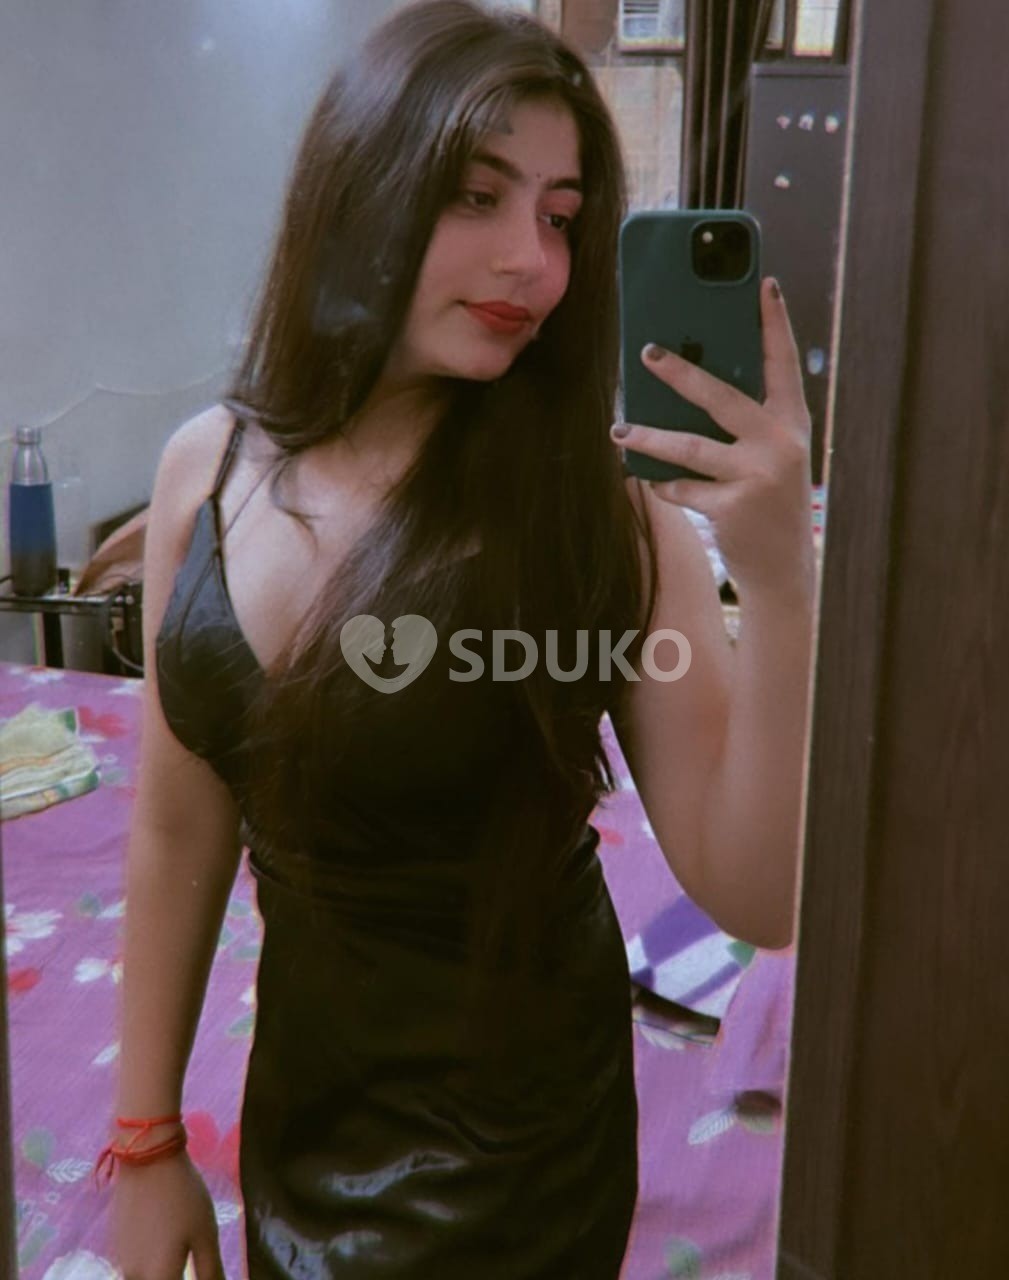 Coimbatore ⭐ ⭐ bBest Vvip High Profile College And Bhabhis Safe Escort Service Available